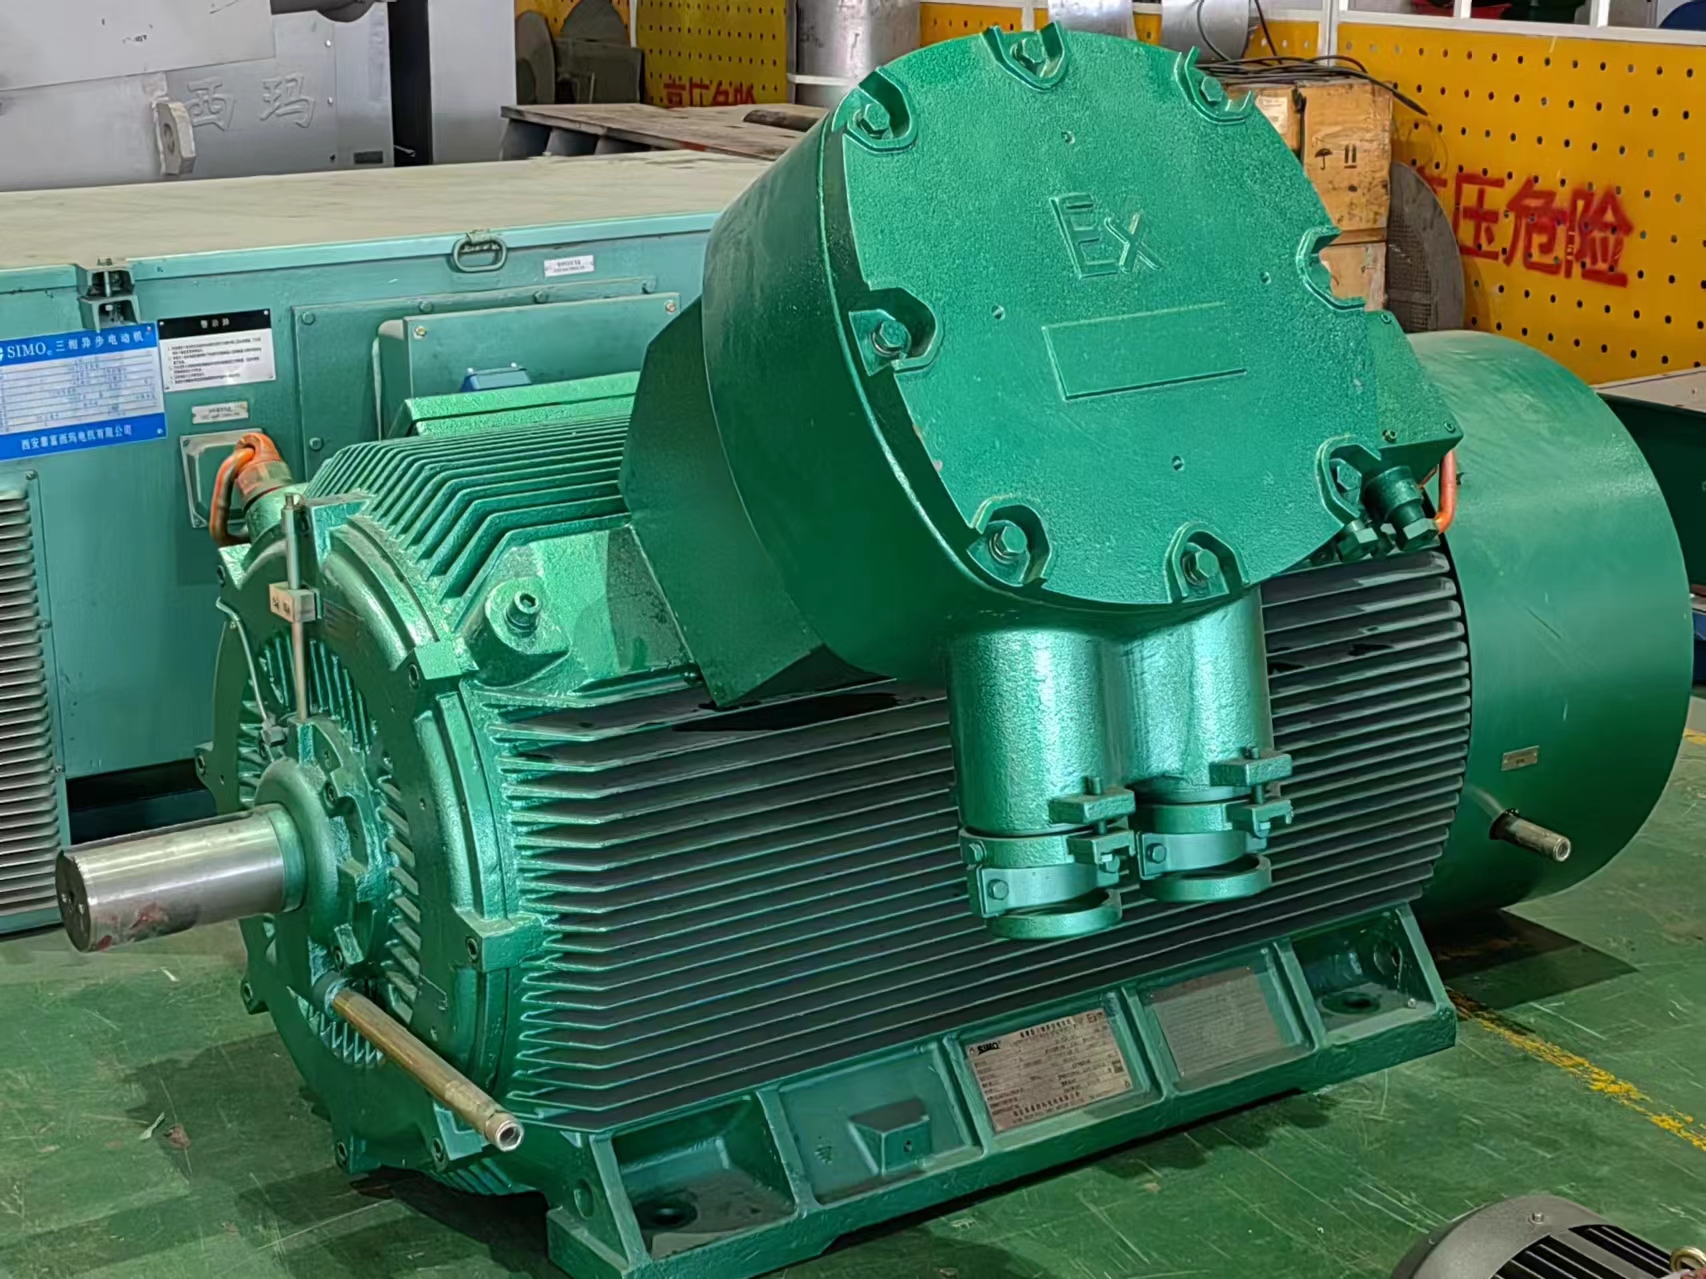 Explosion-Proof Motor for Zone 2: Ensuring Safety and Efficiency in Hazardous Environments